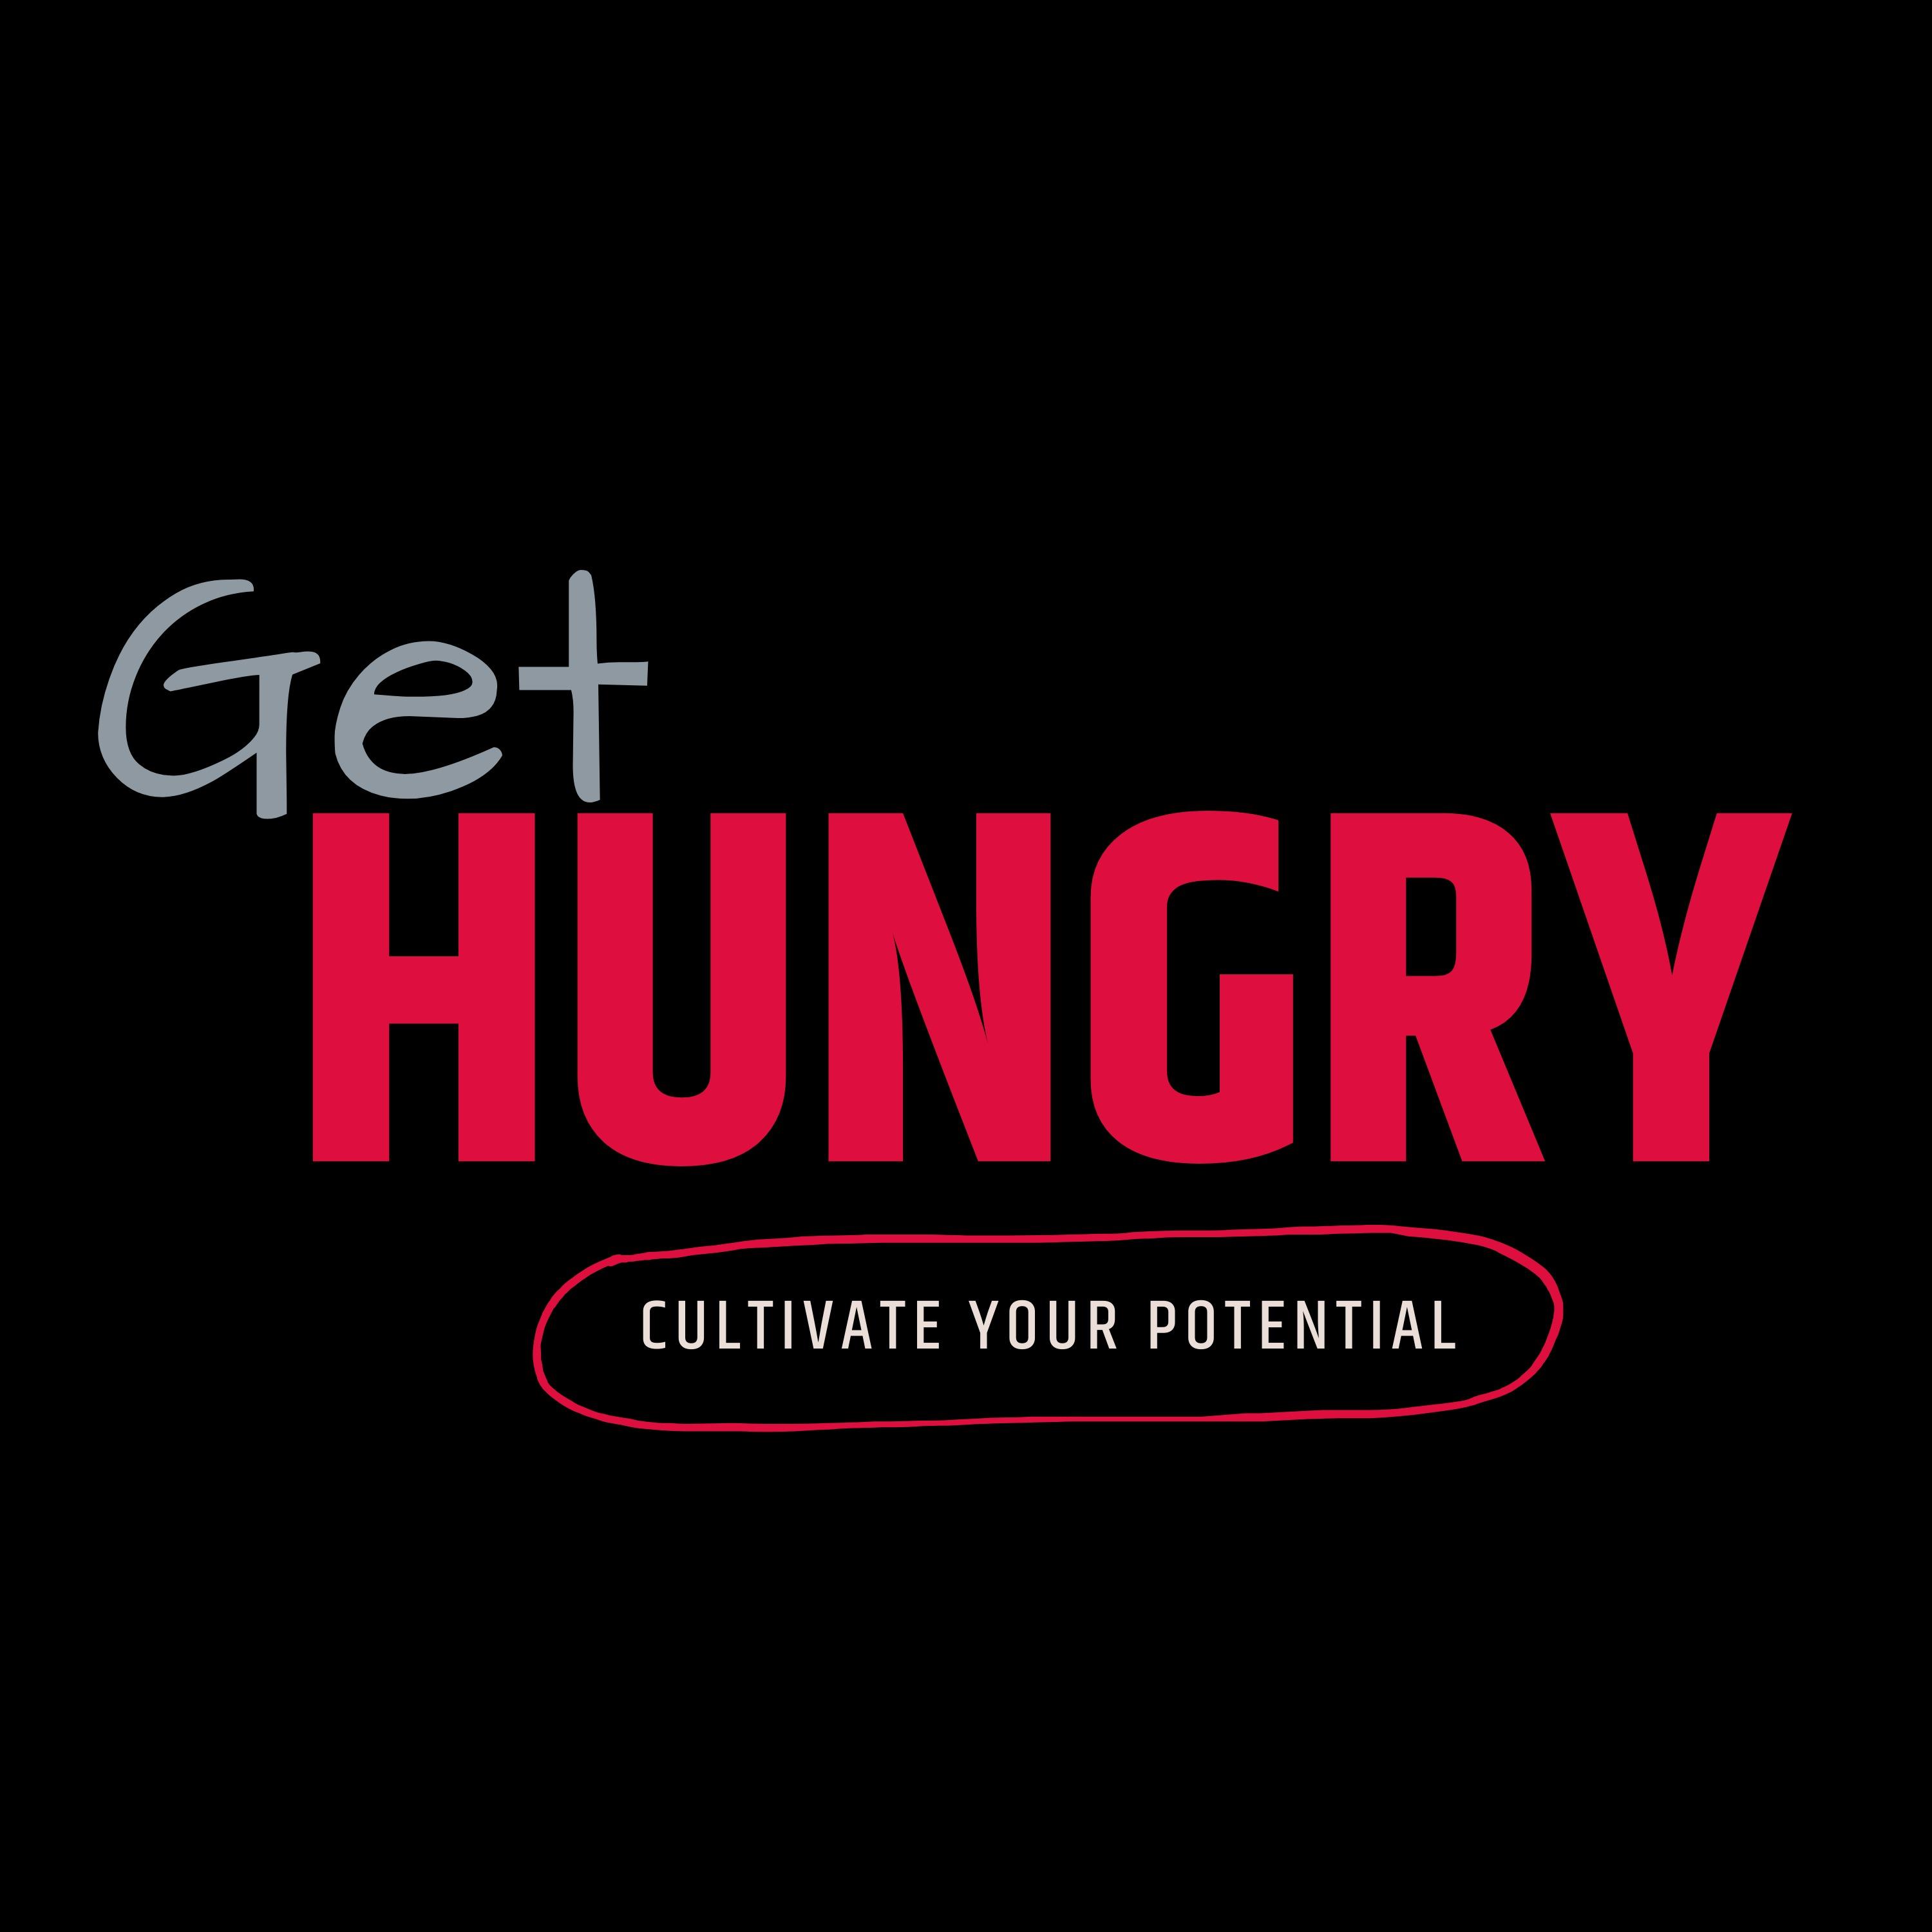 Get Hungry: Cultivate Your Potential